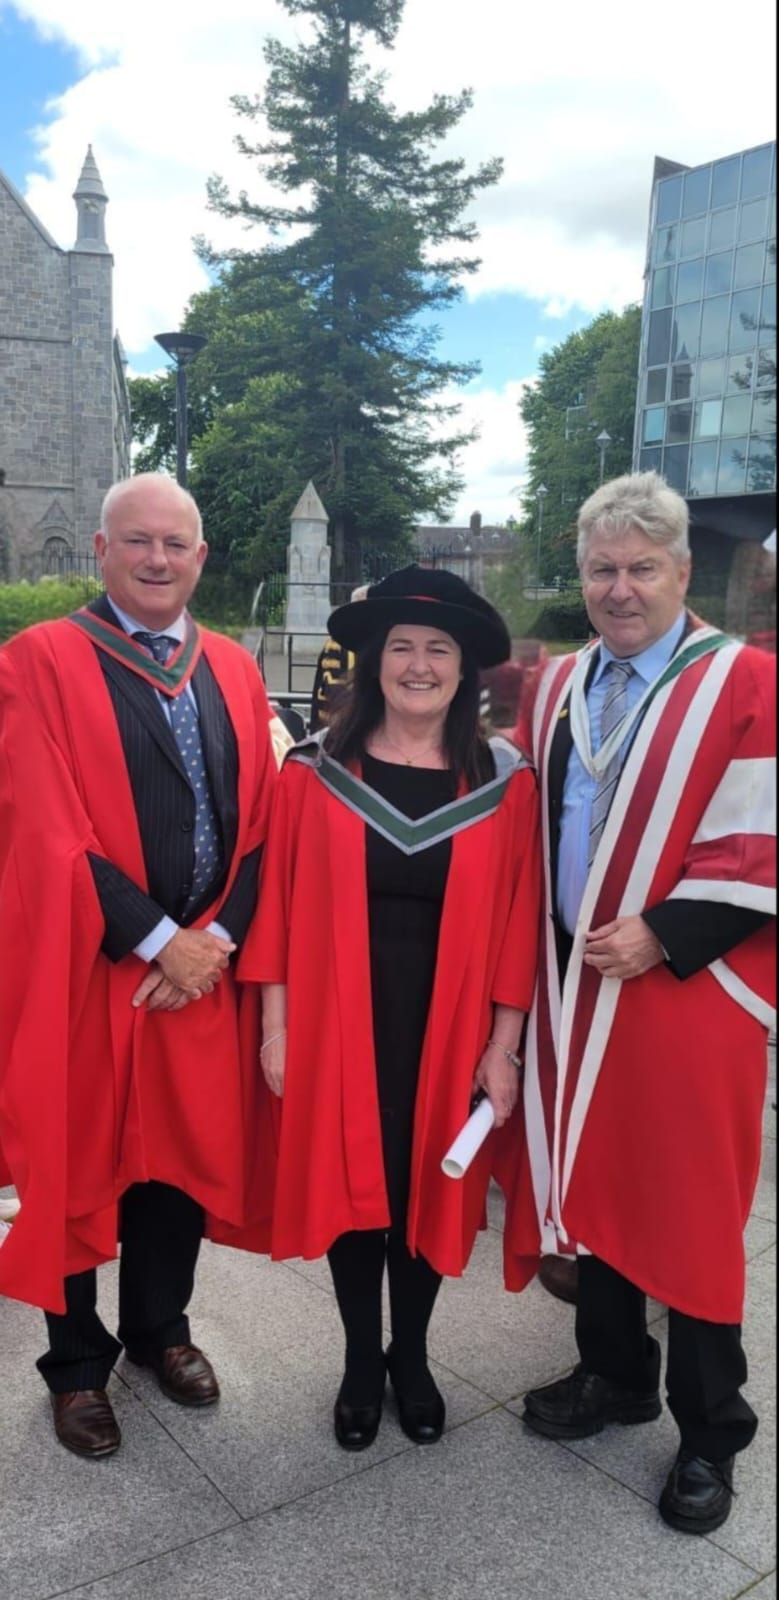 Dr Patricia McDermott conferred with a PhD in Dentistry 